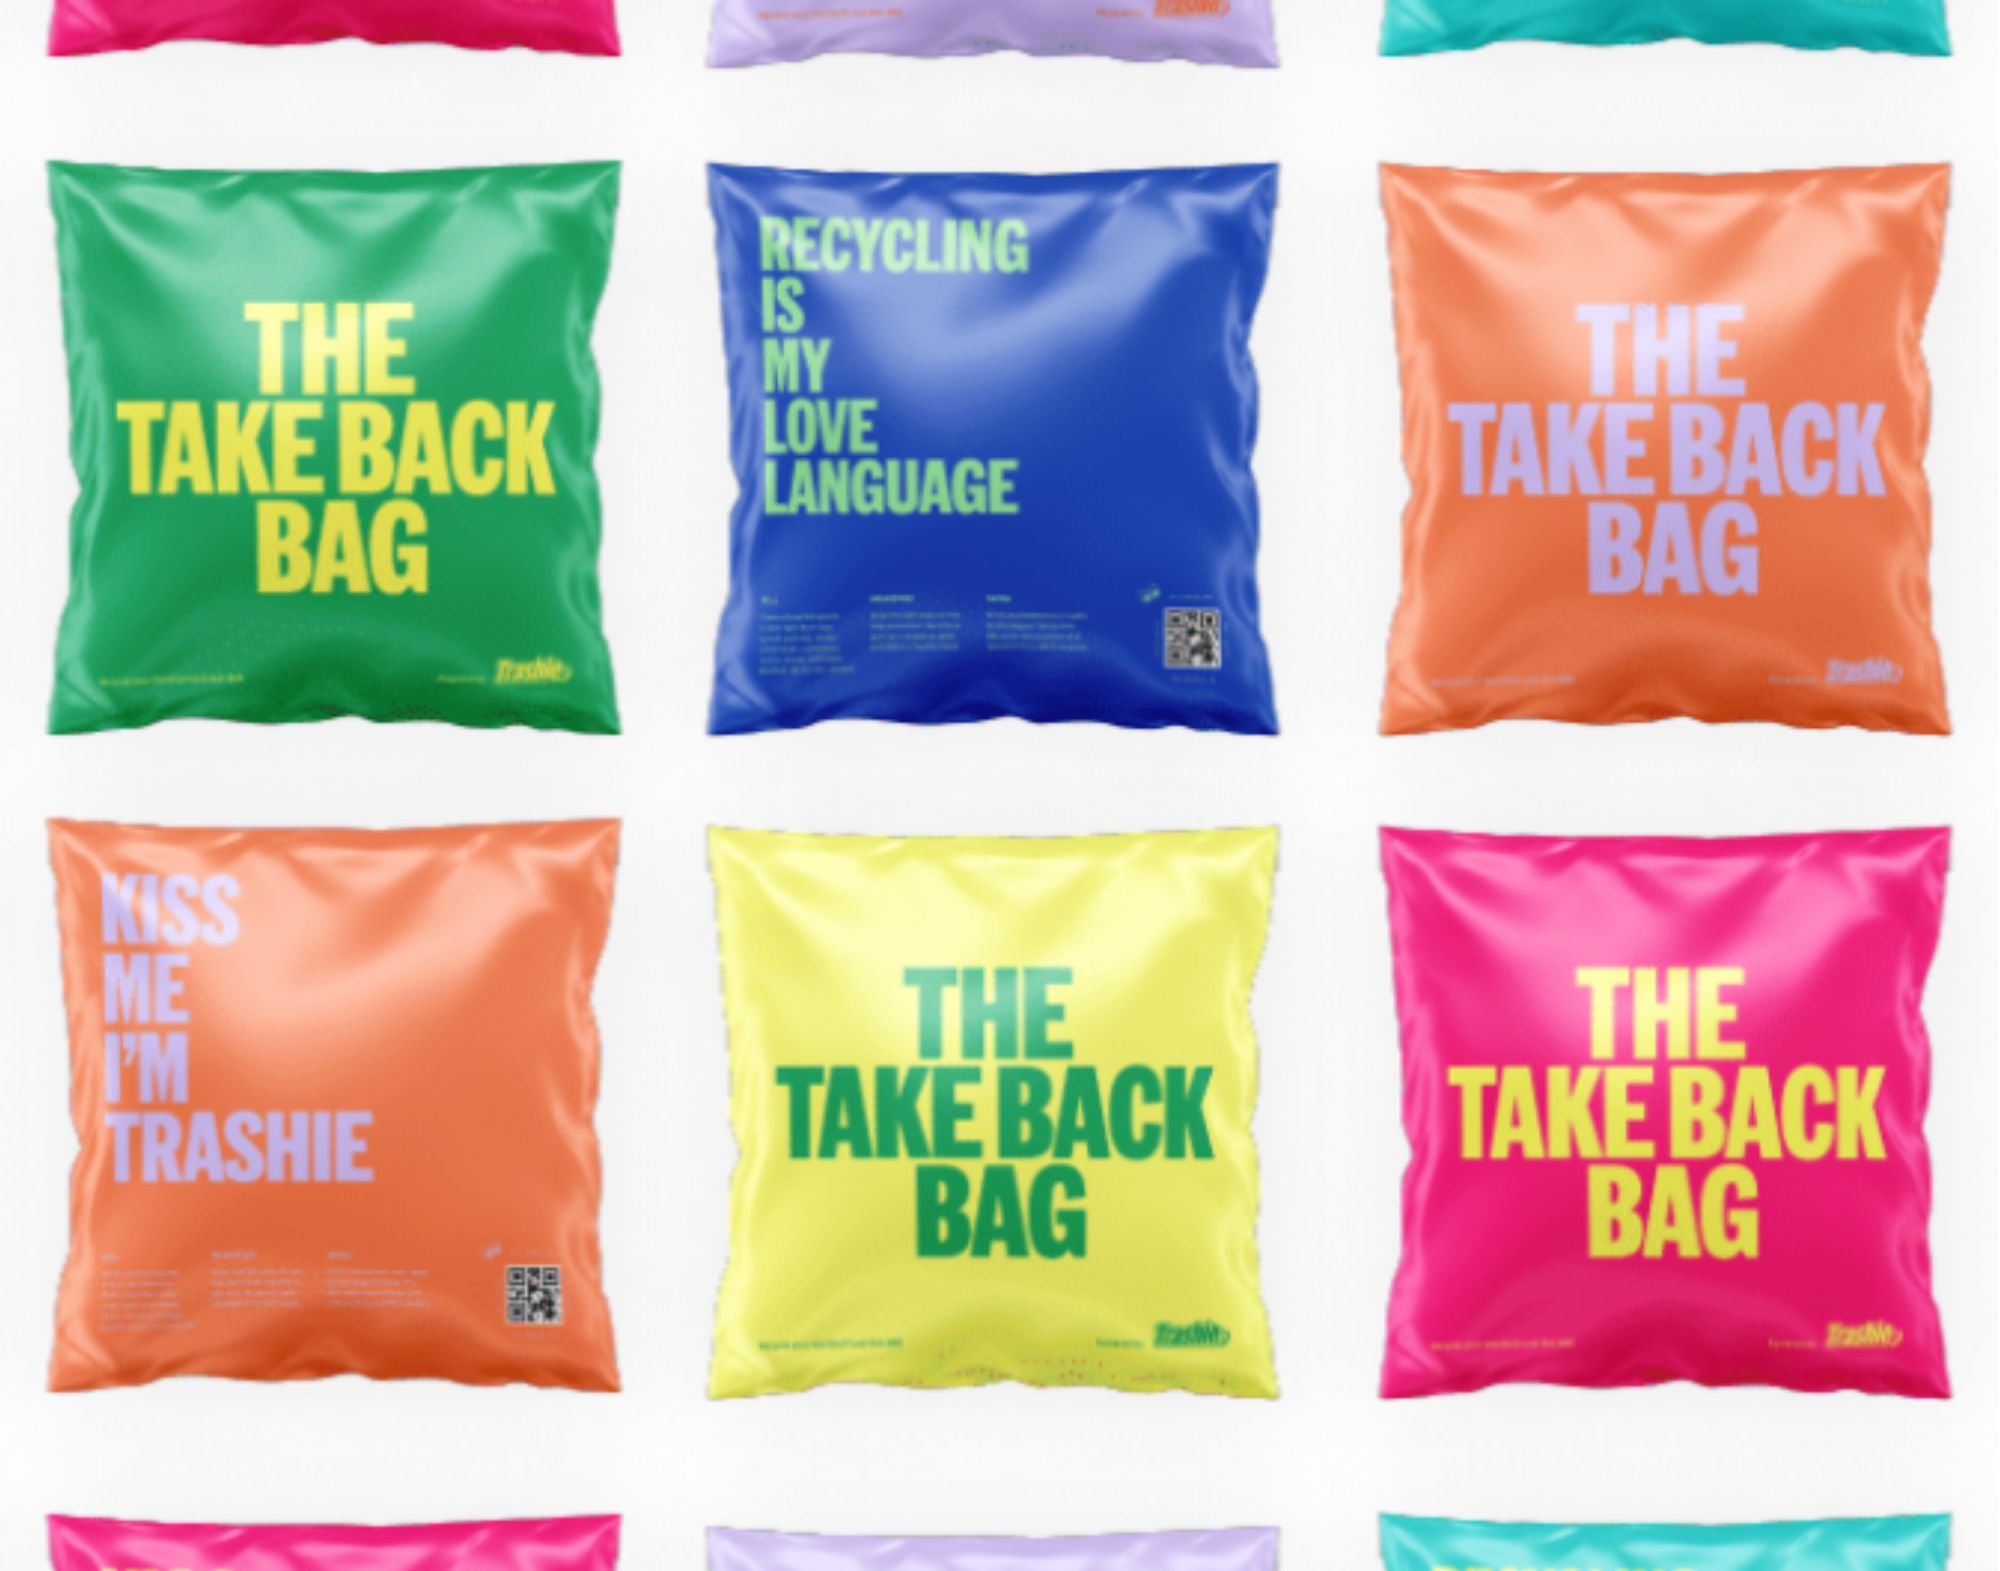 The Take Back Bag for Clothing Recycling